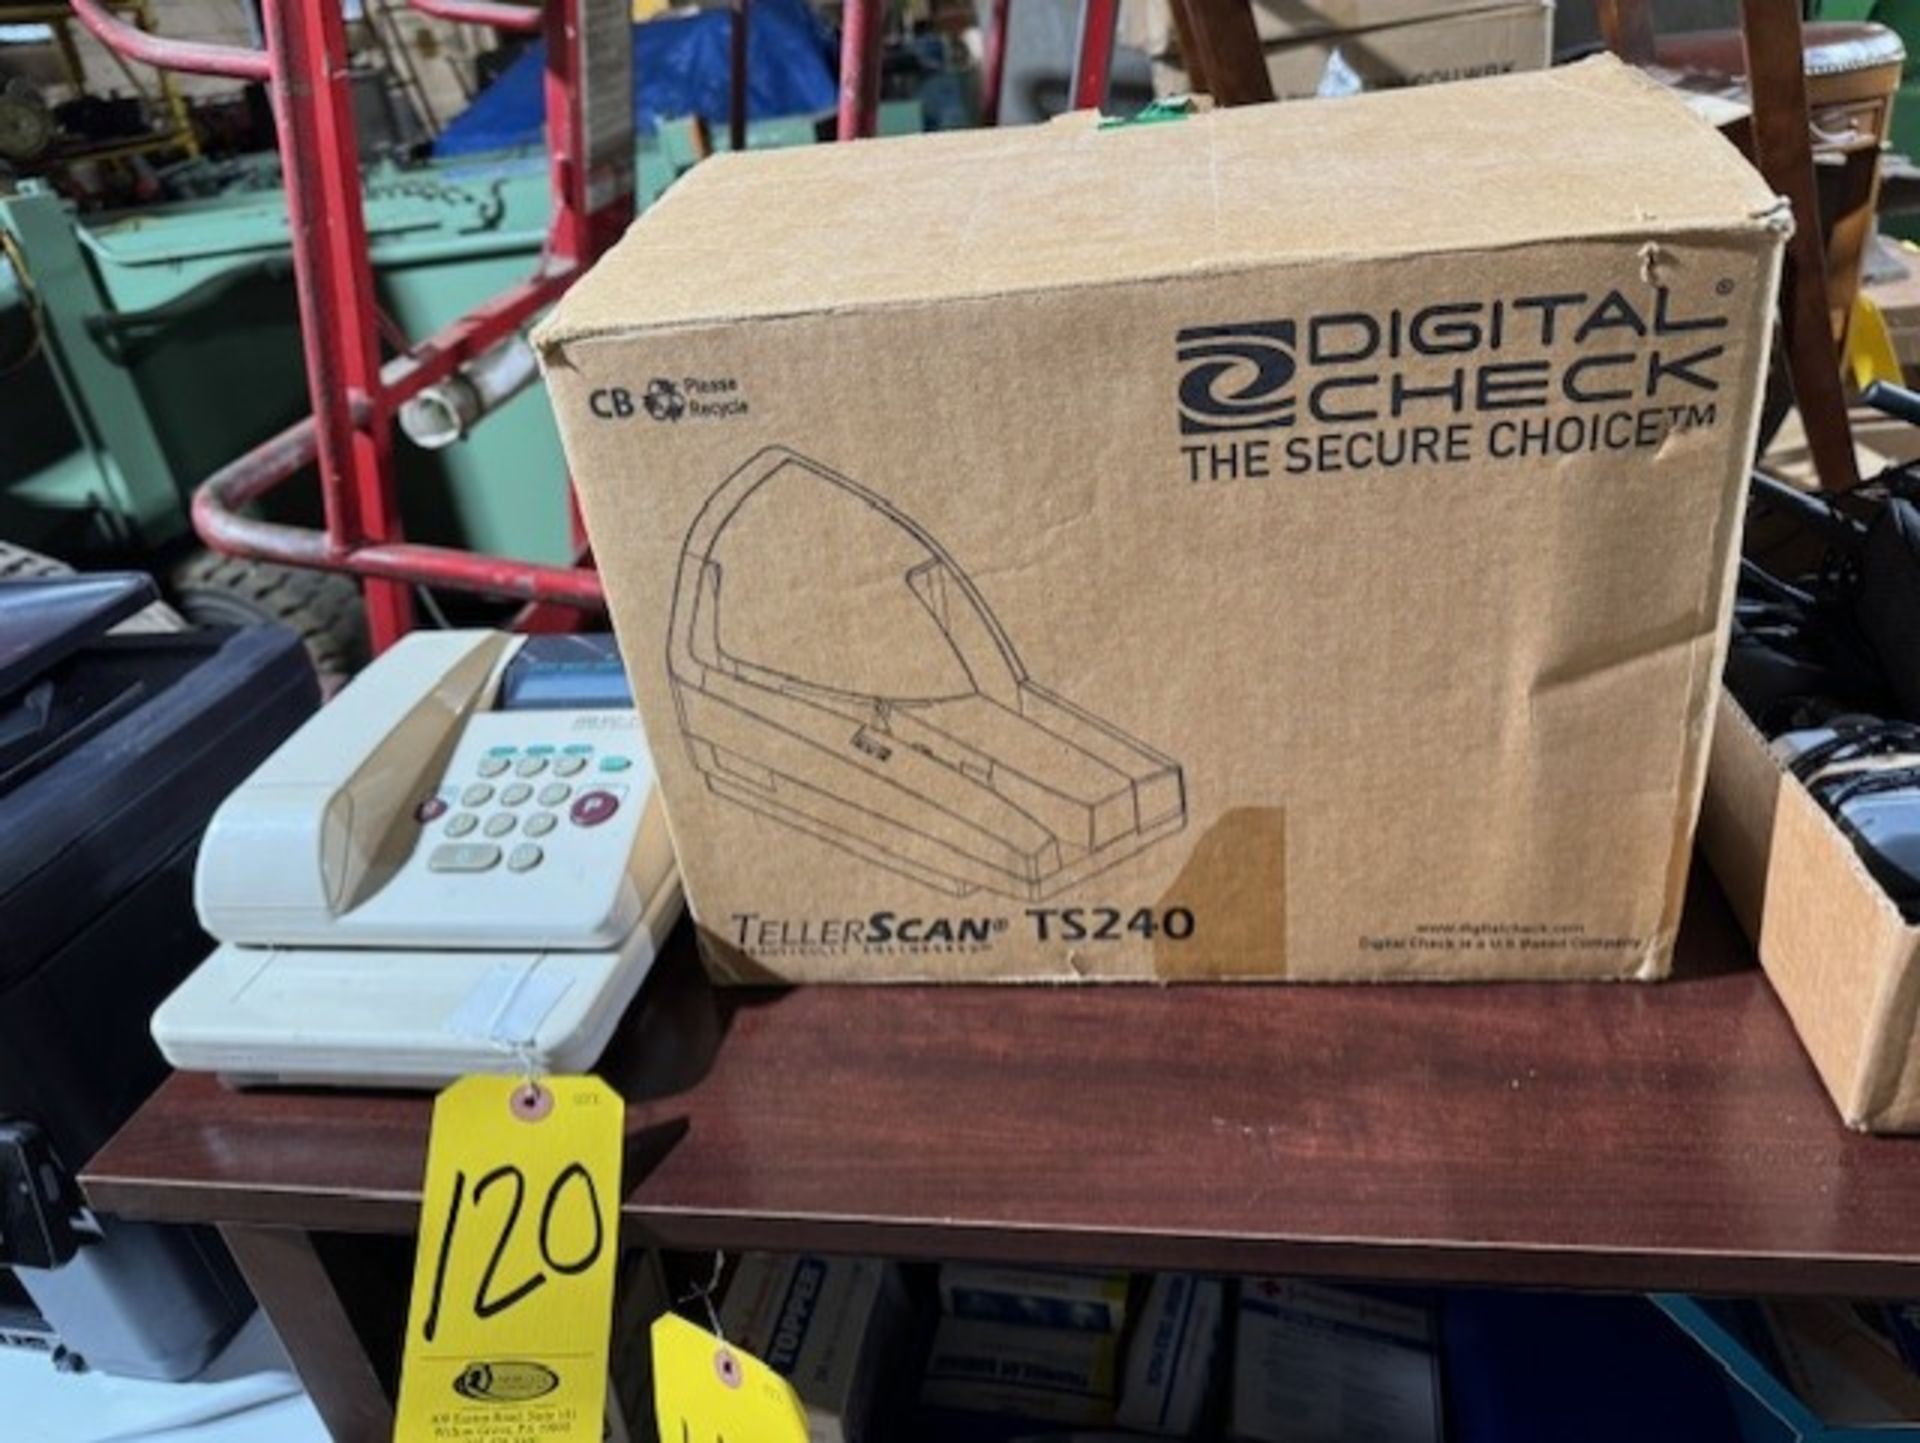 TELLERSCAN TS240 DIGITAL CHECK MACHINE, NEVER USED AND EC-70 ELCTRONIC CHECK...